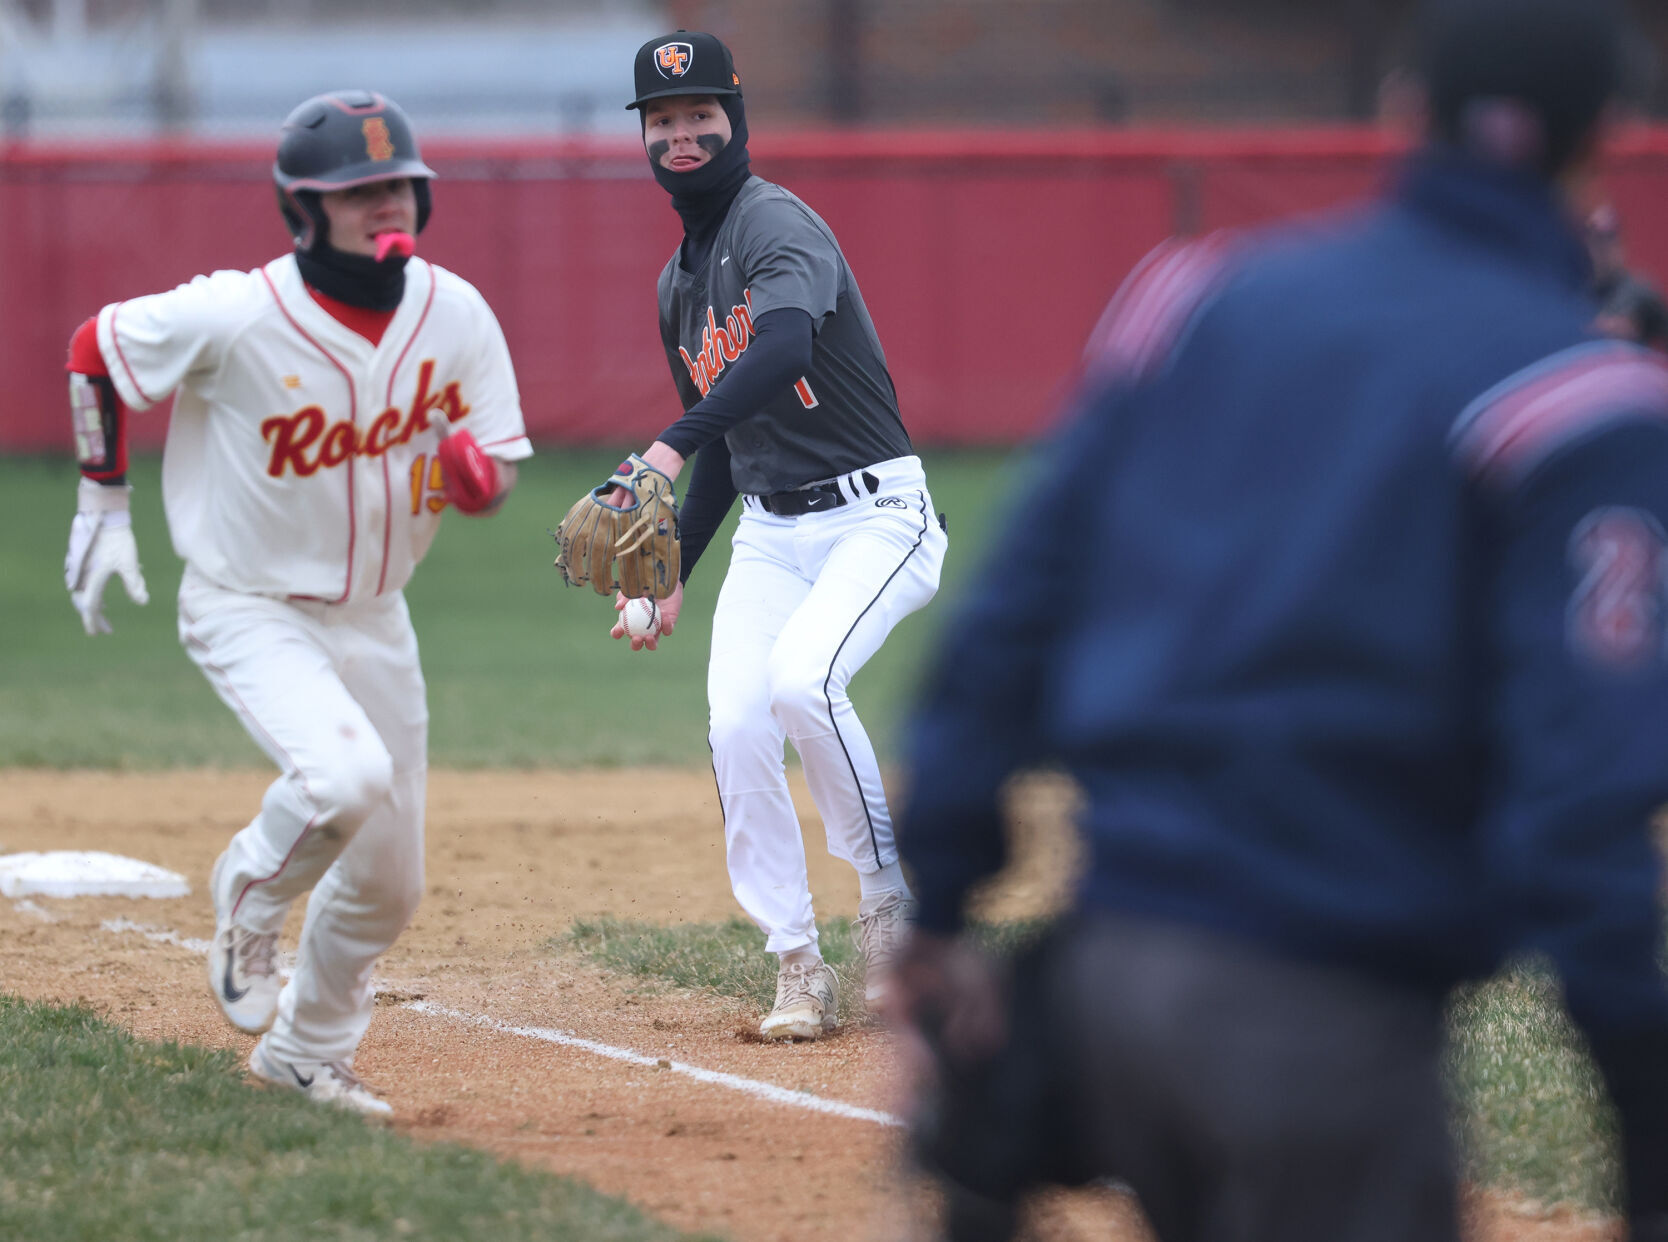 Exciting Baseball Game: Rock Island Rocks Edge United Township Panthers 7-6